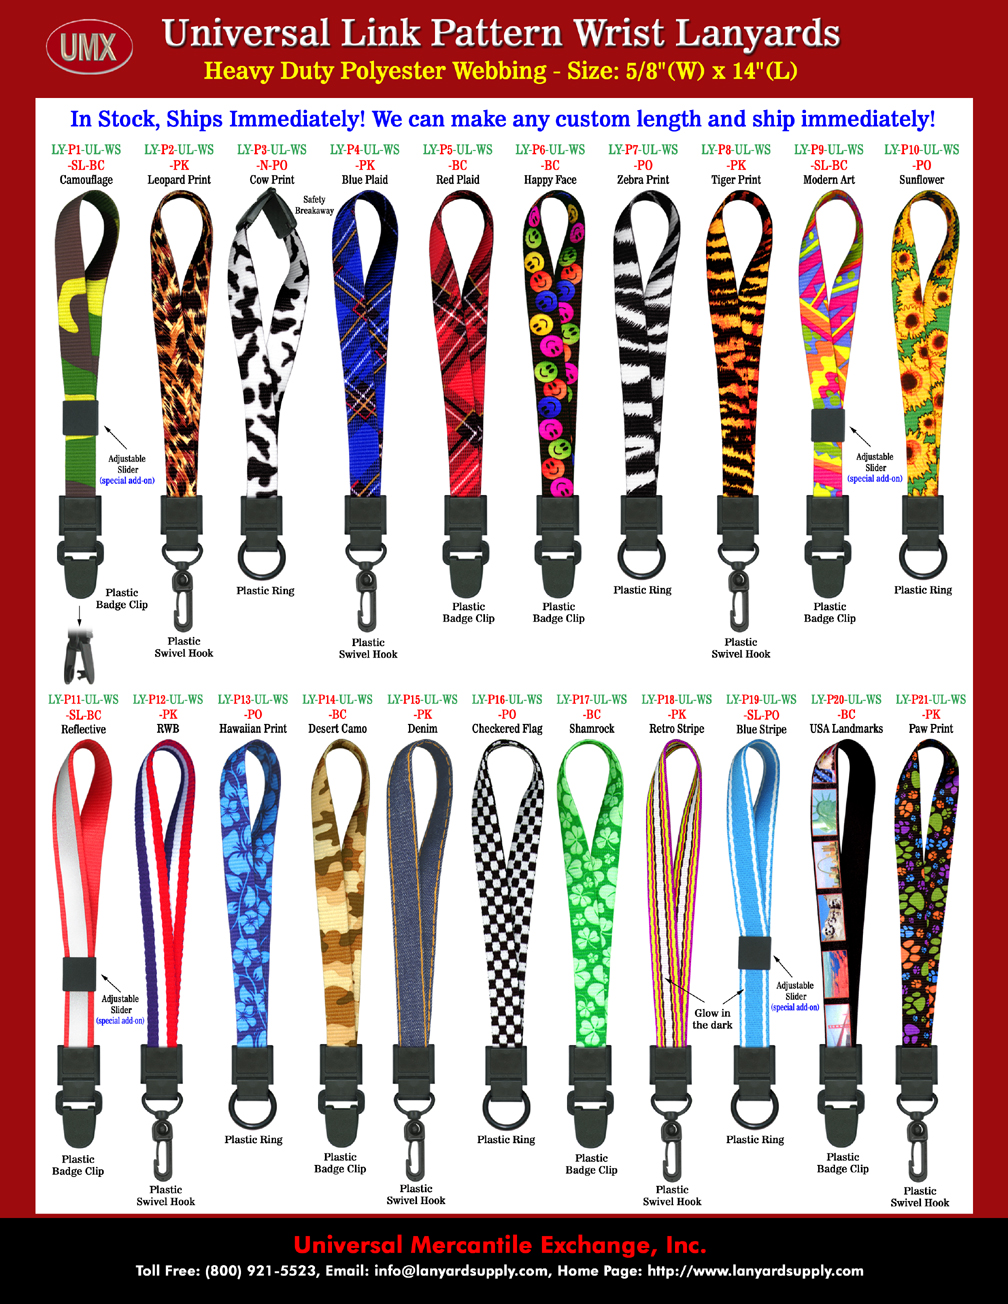 Unique Designed All Plastic Pre-Printed Universal Link Wrist Lanyards - Scan-Safe Wrist Lanyards With More Than 20 Themes In Stock.